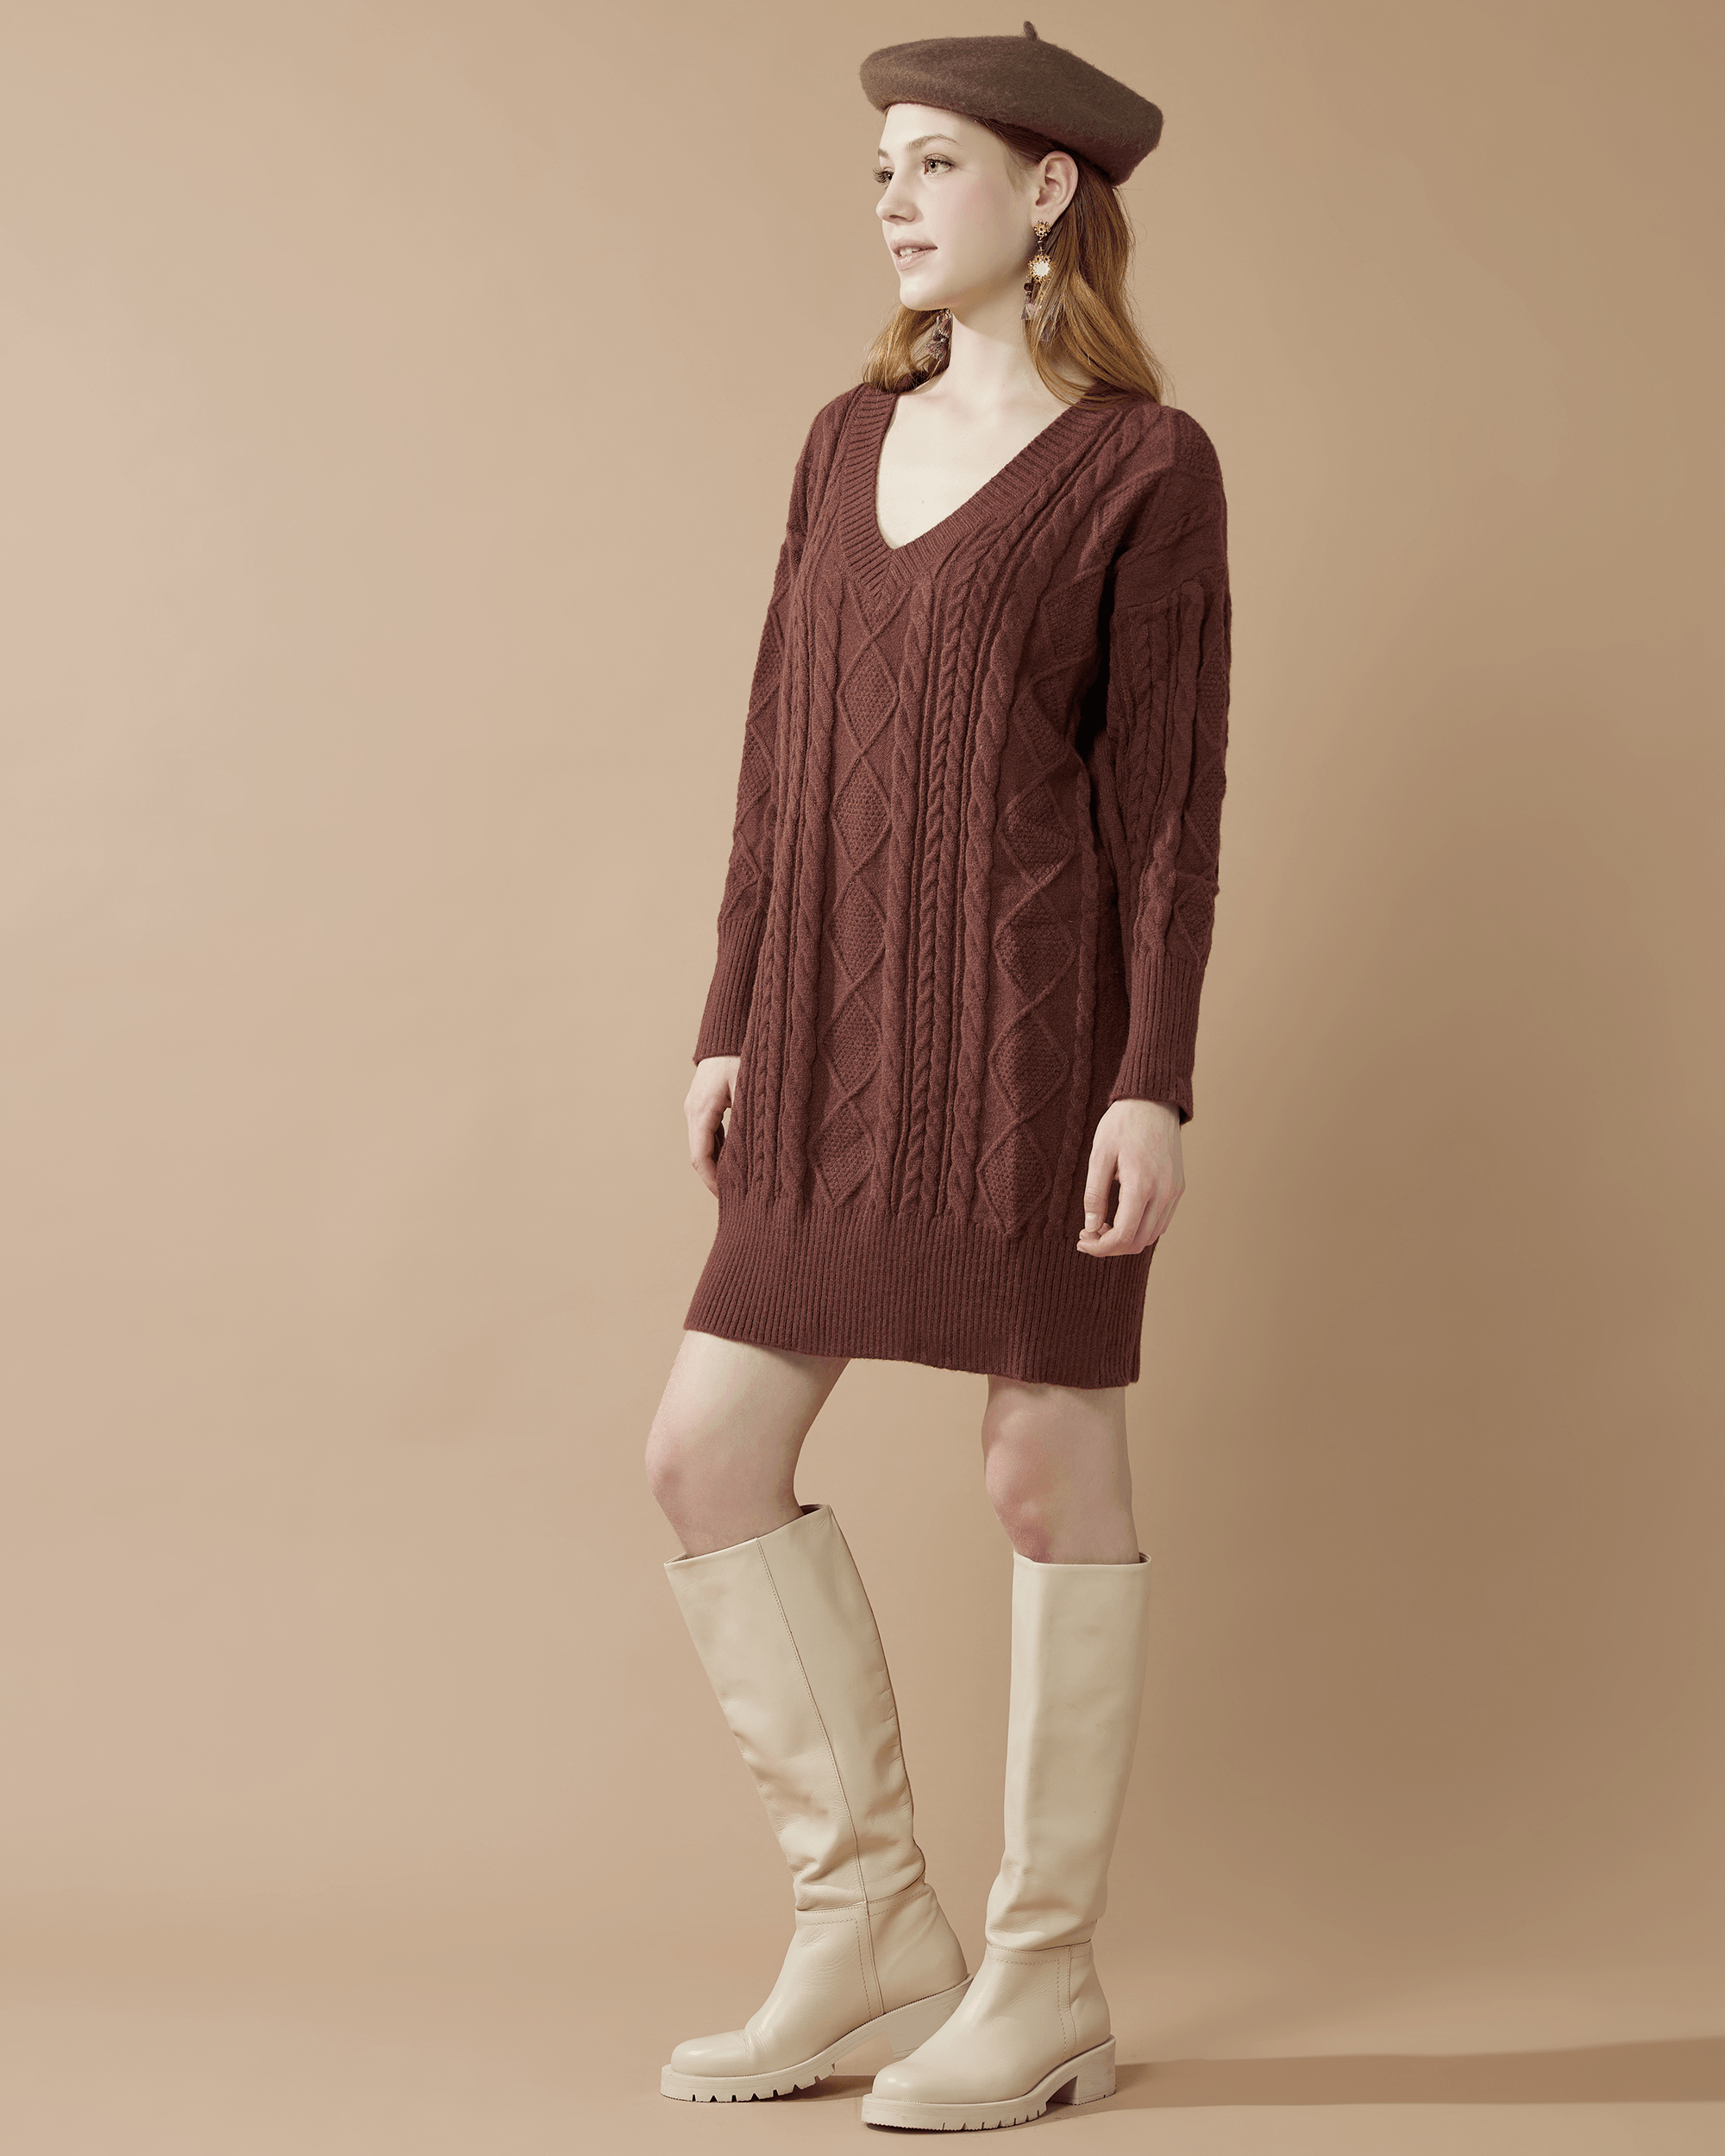 V-Neck Cable Knit Sweater Dress - Chocolate